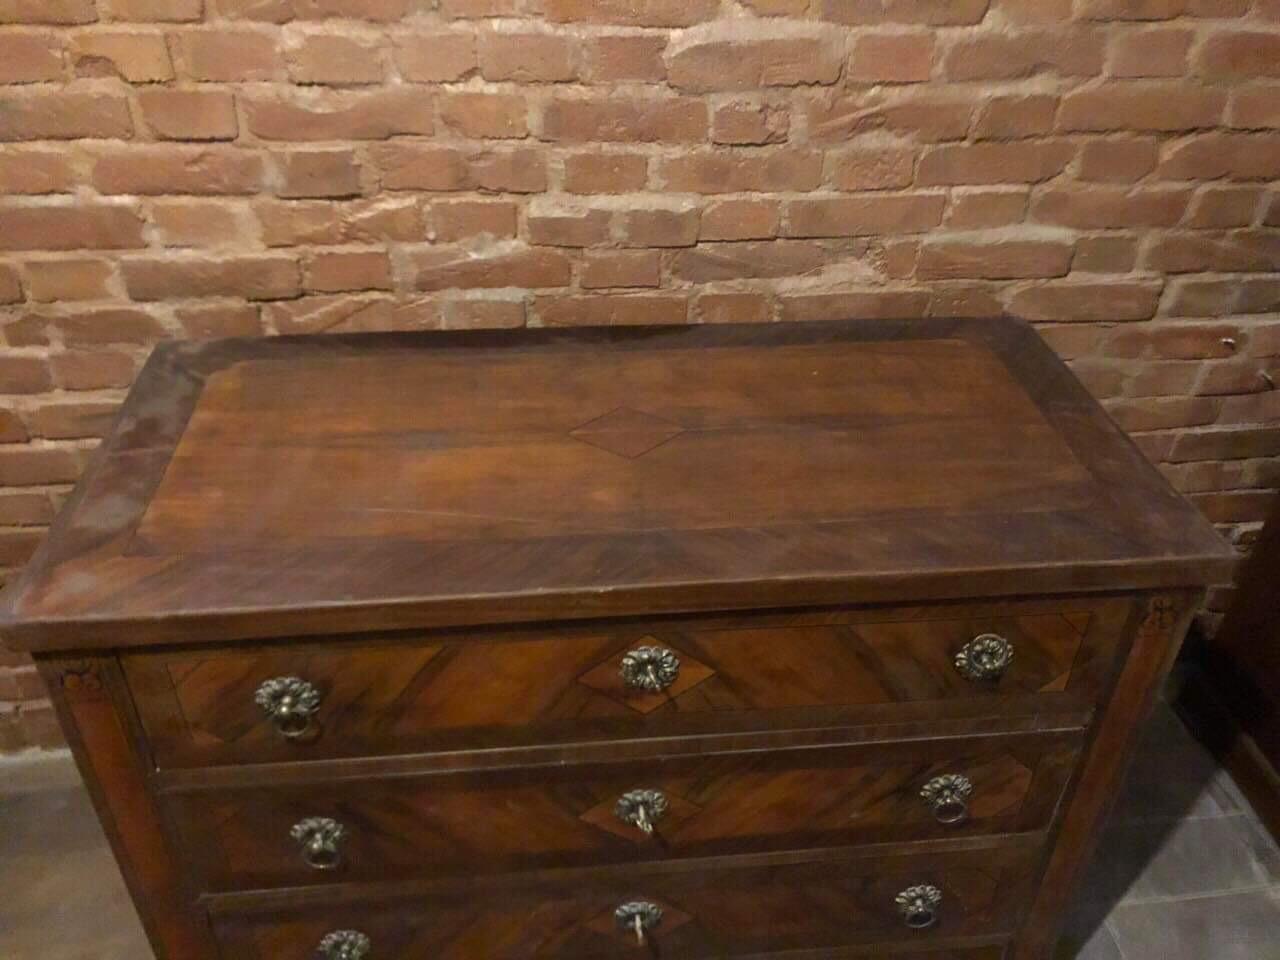 Beautiful Biedermeier commode which is in original conditions.
All the part is walnuts aplicat with intarsia stripes. With original handle, lock and key. I can restore it as needed.